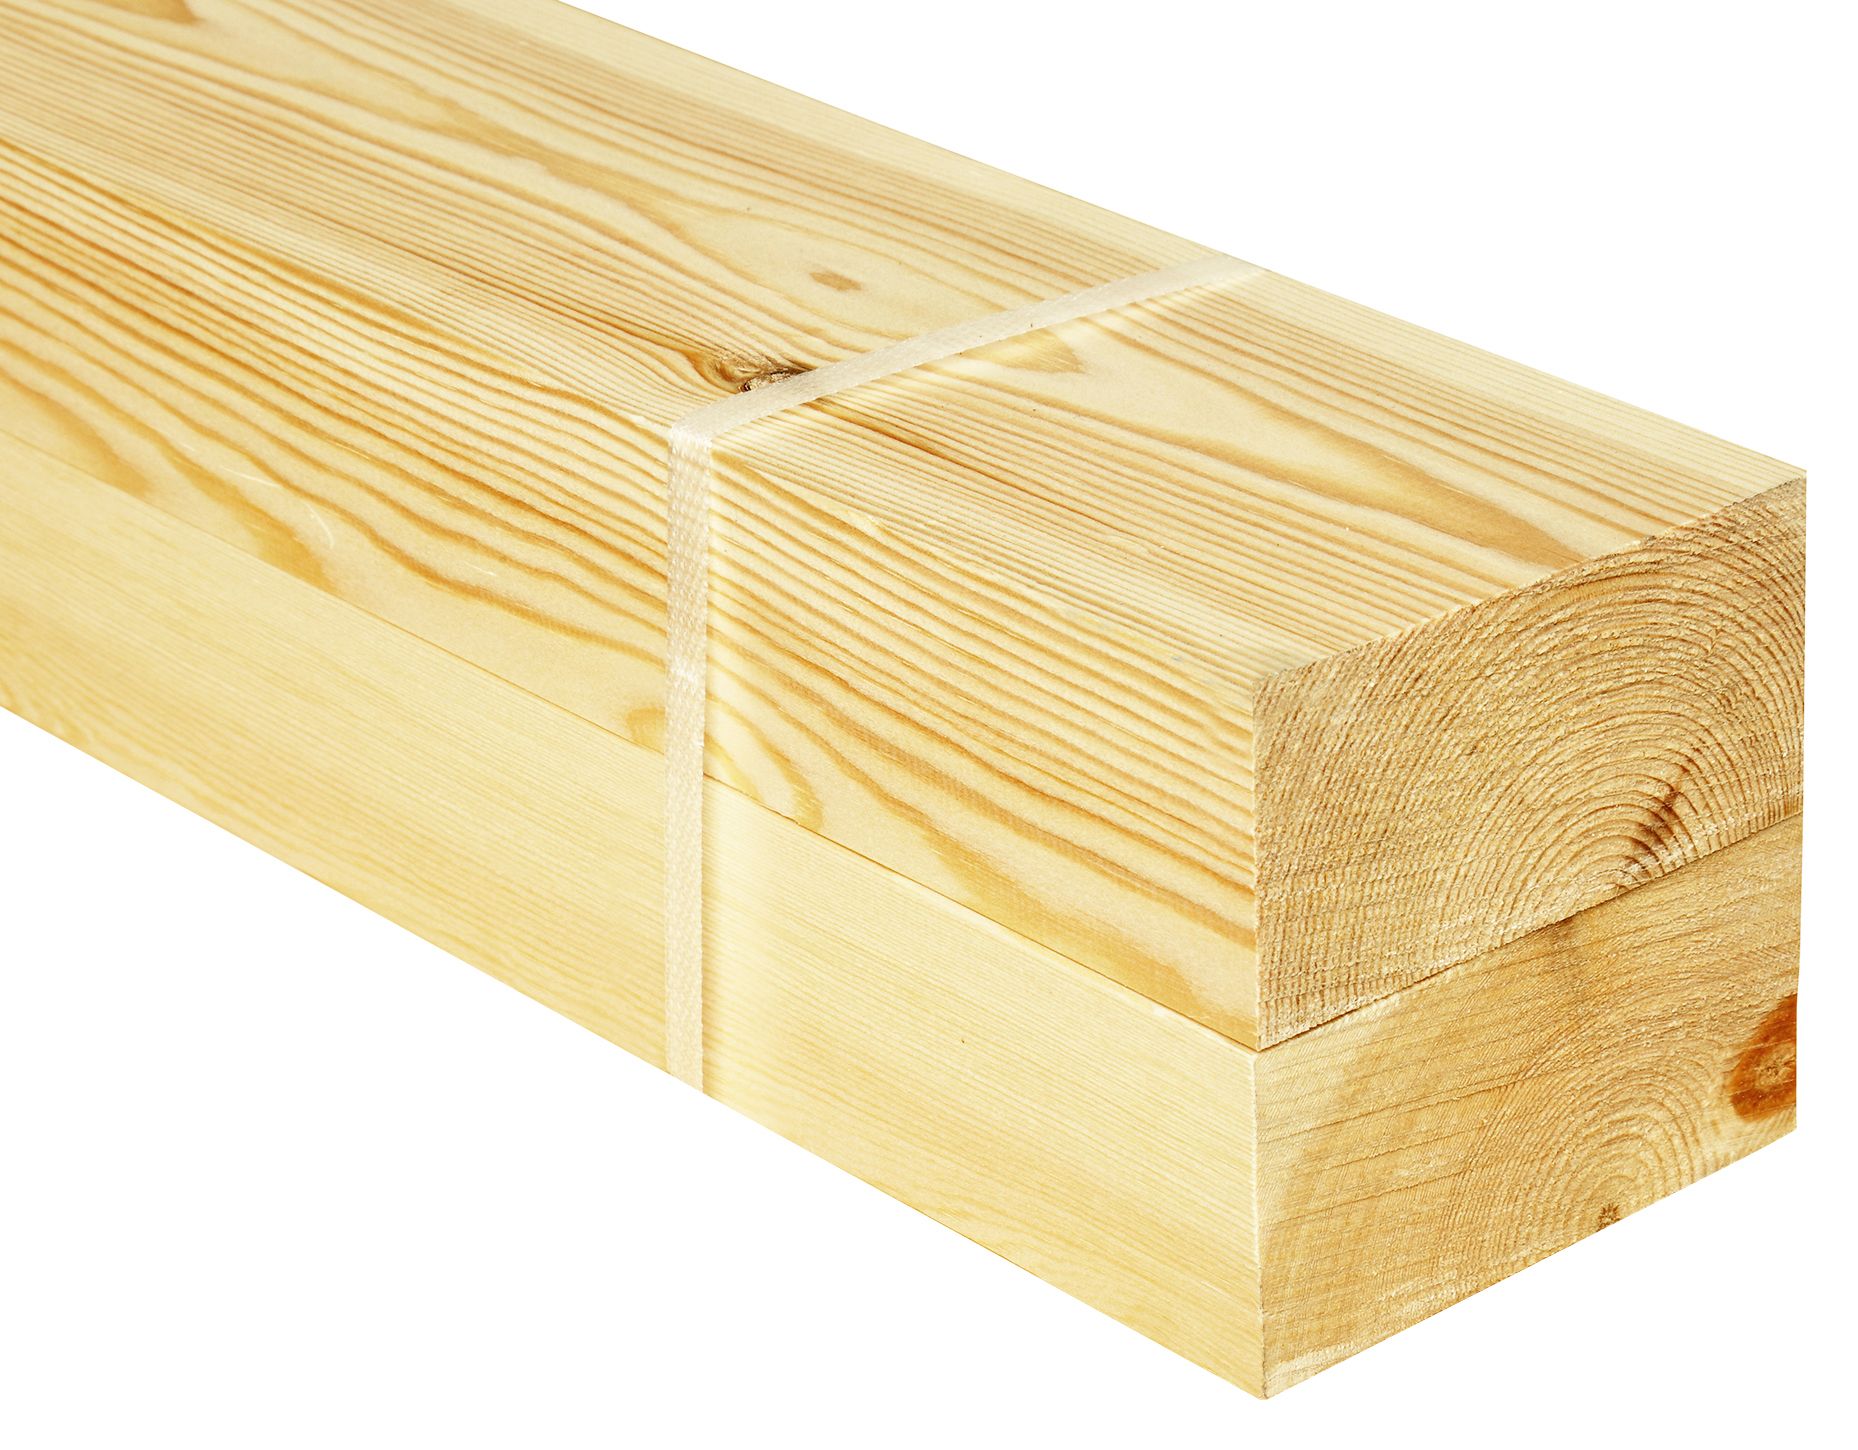 Wickes Redwood PSE Timber - 44 x 94 x 2400mm - Pack of 2